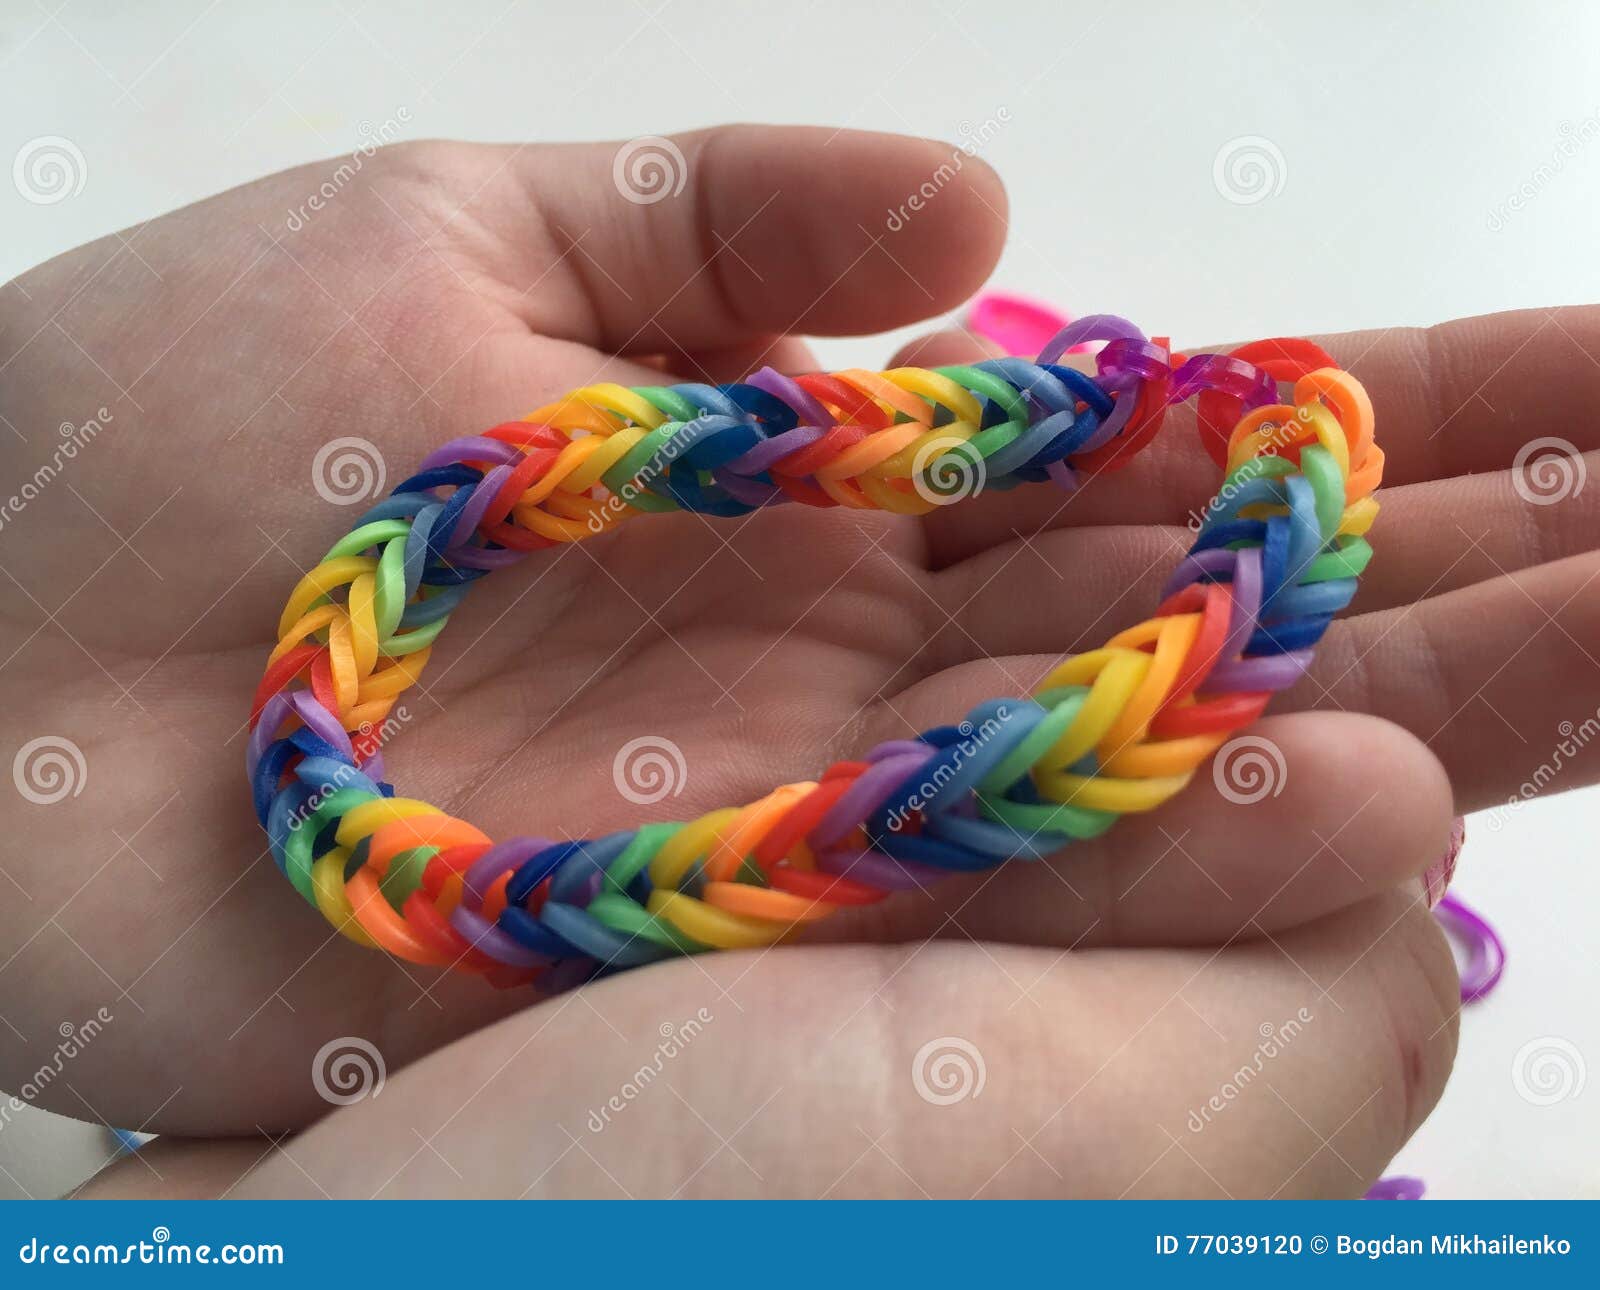 The Making Bracelets from Rubber Bands Stock Photo - Image of bands, work:  77039120